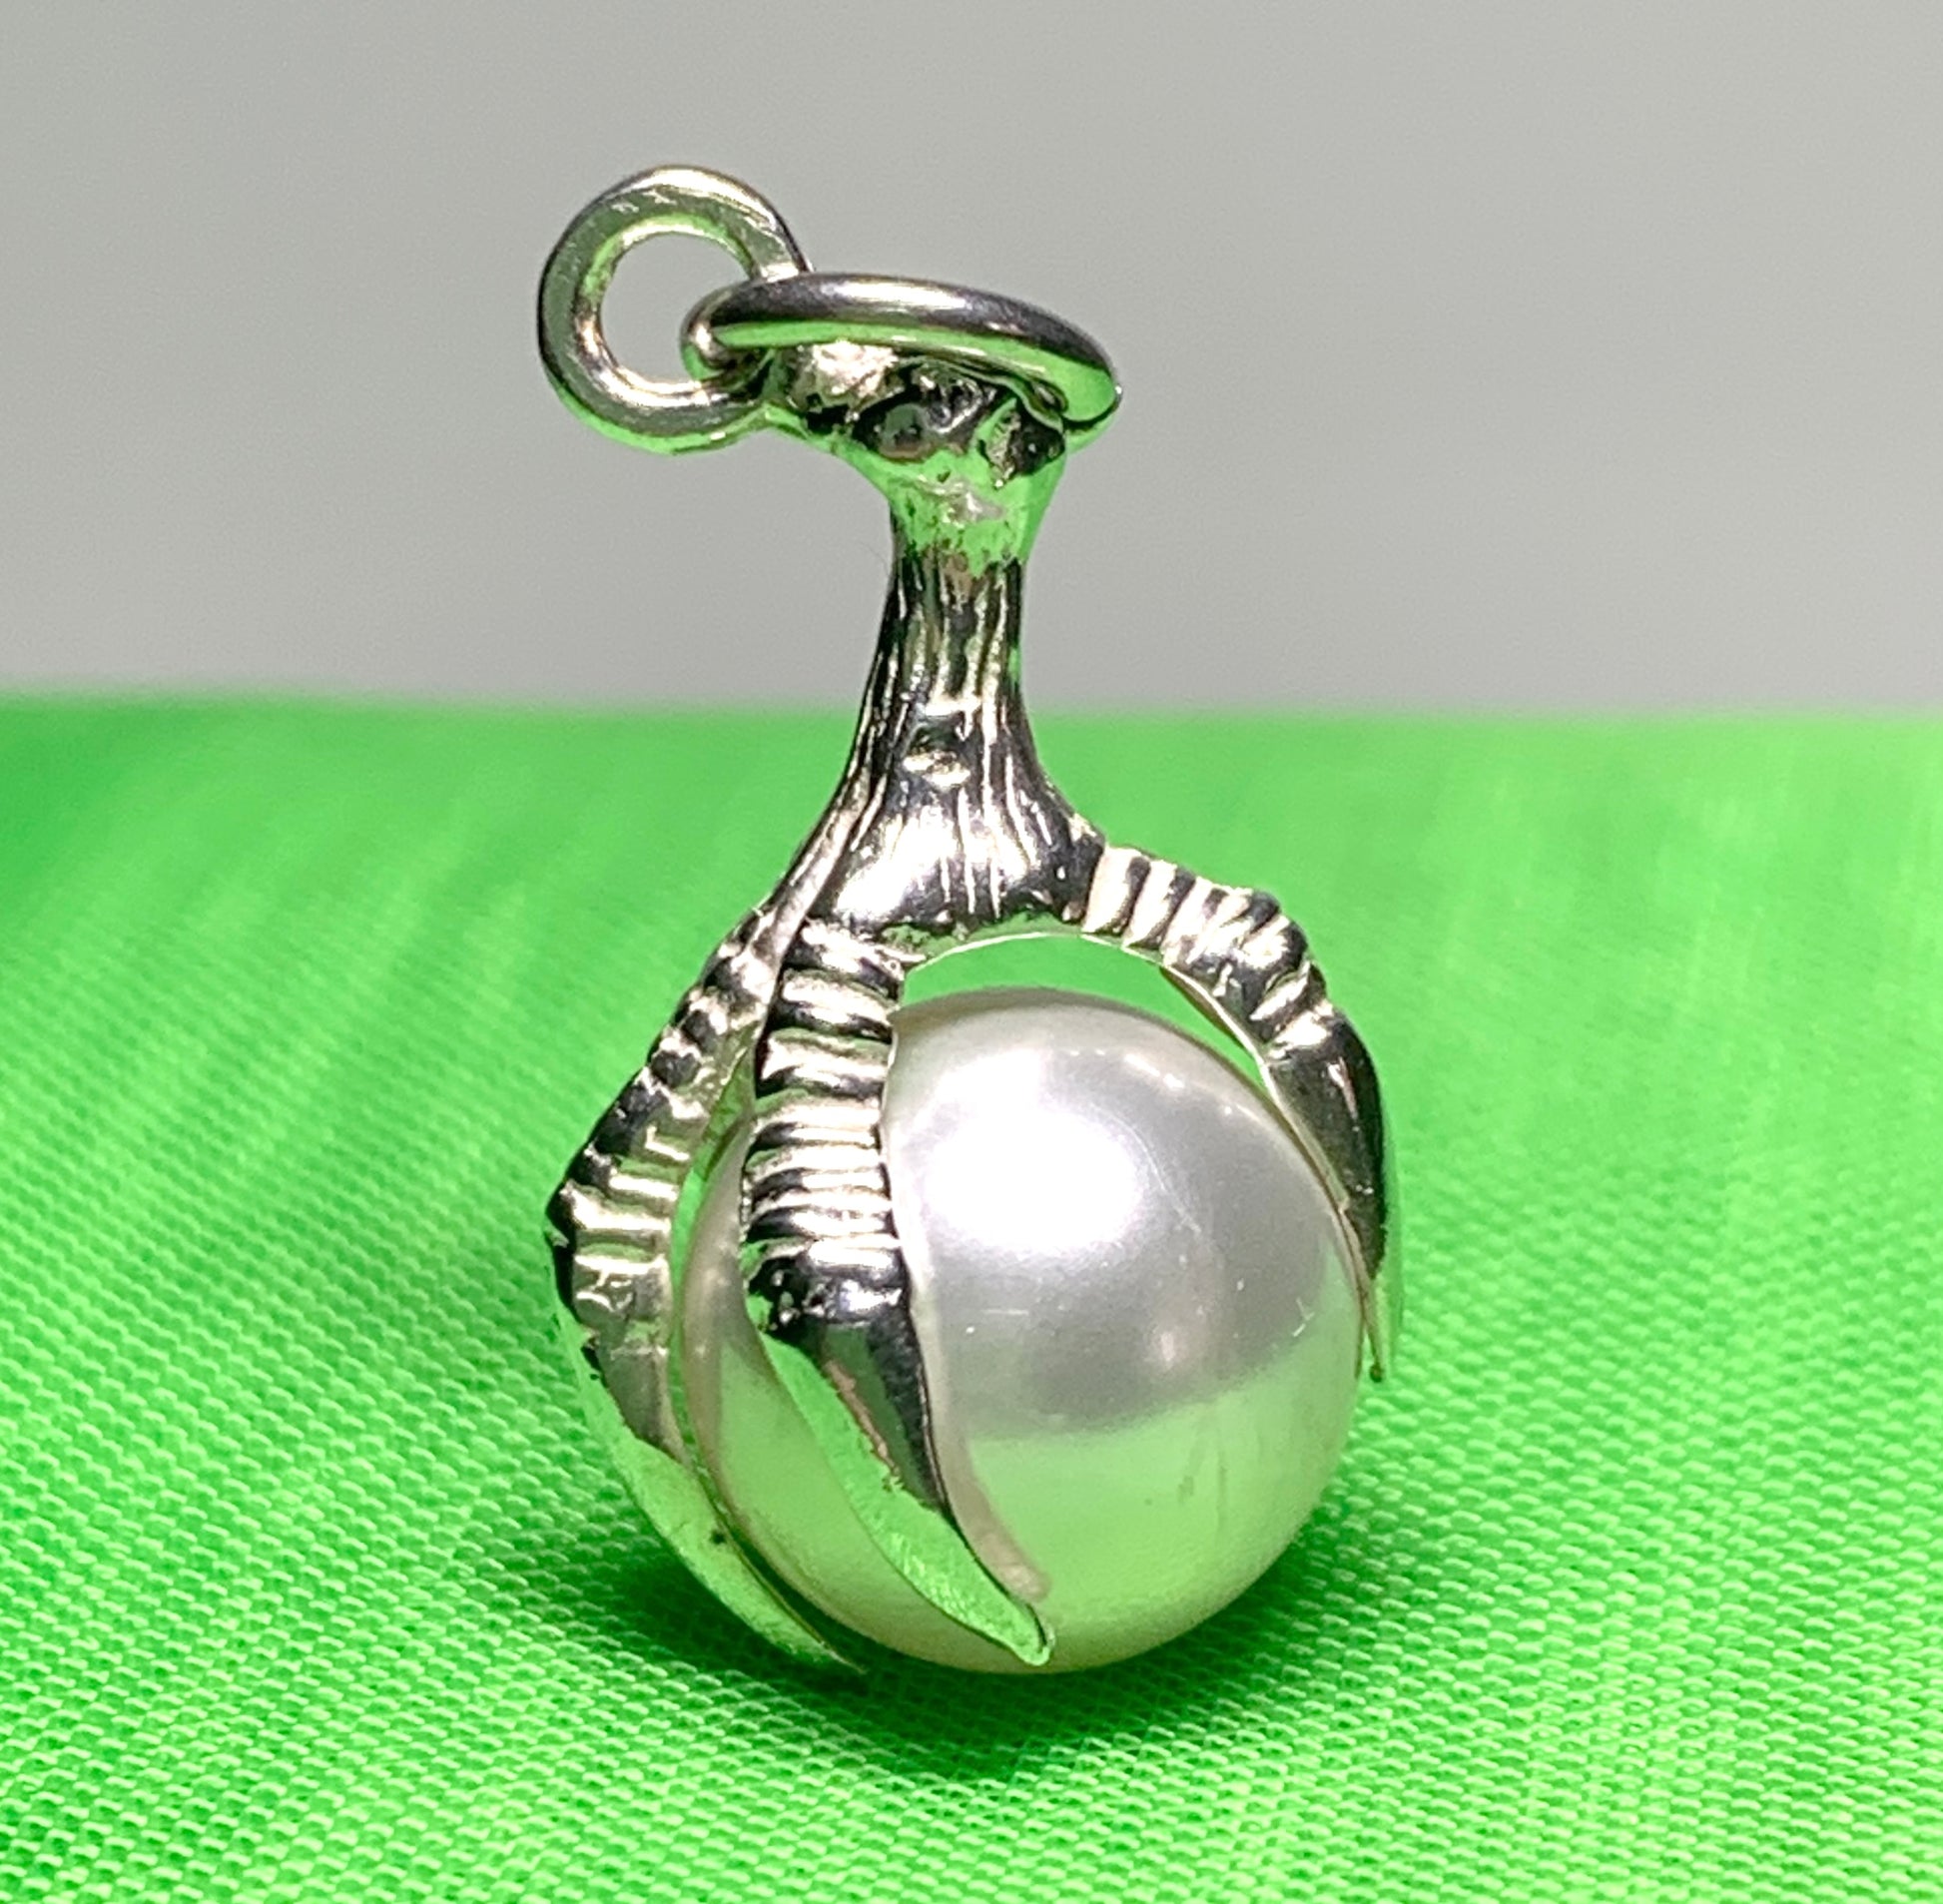 Bird of Prey talon hooked claw real freshwater pearl charm silver